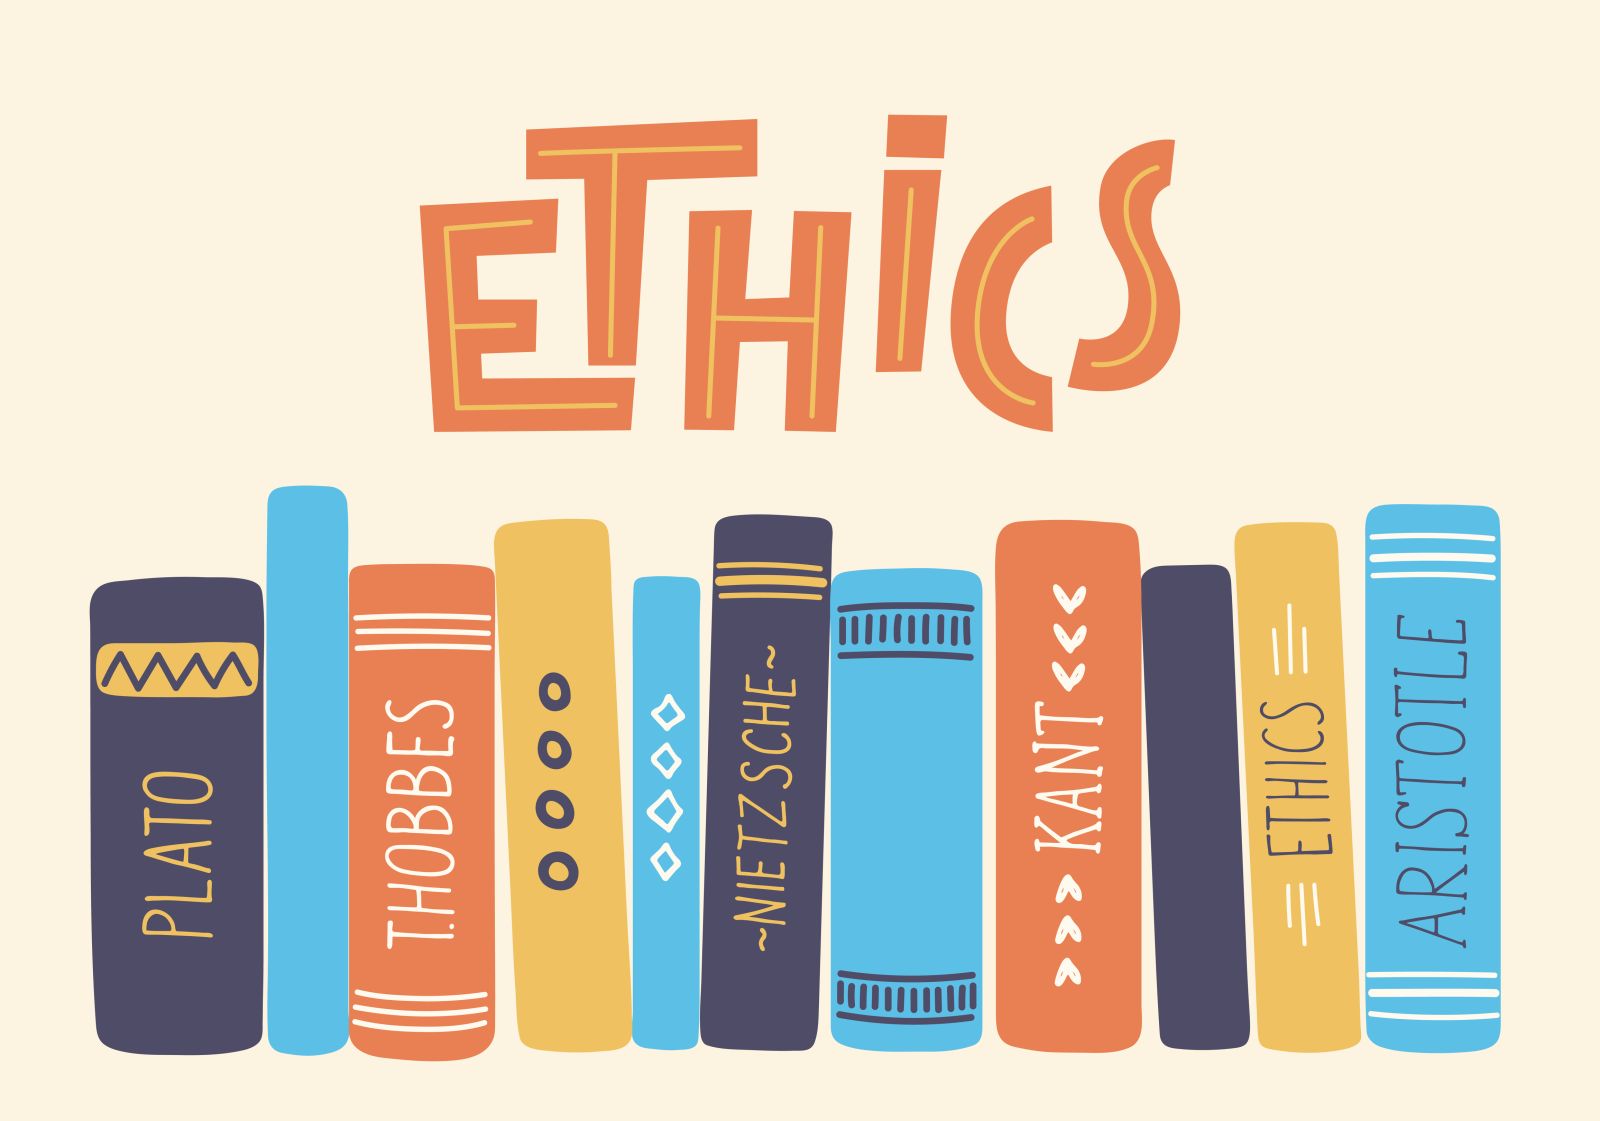 Philosophy Books with "Ethics" above them